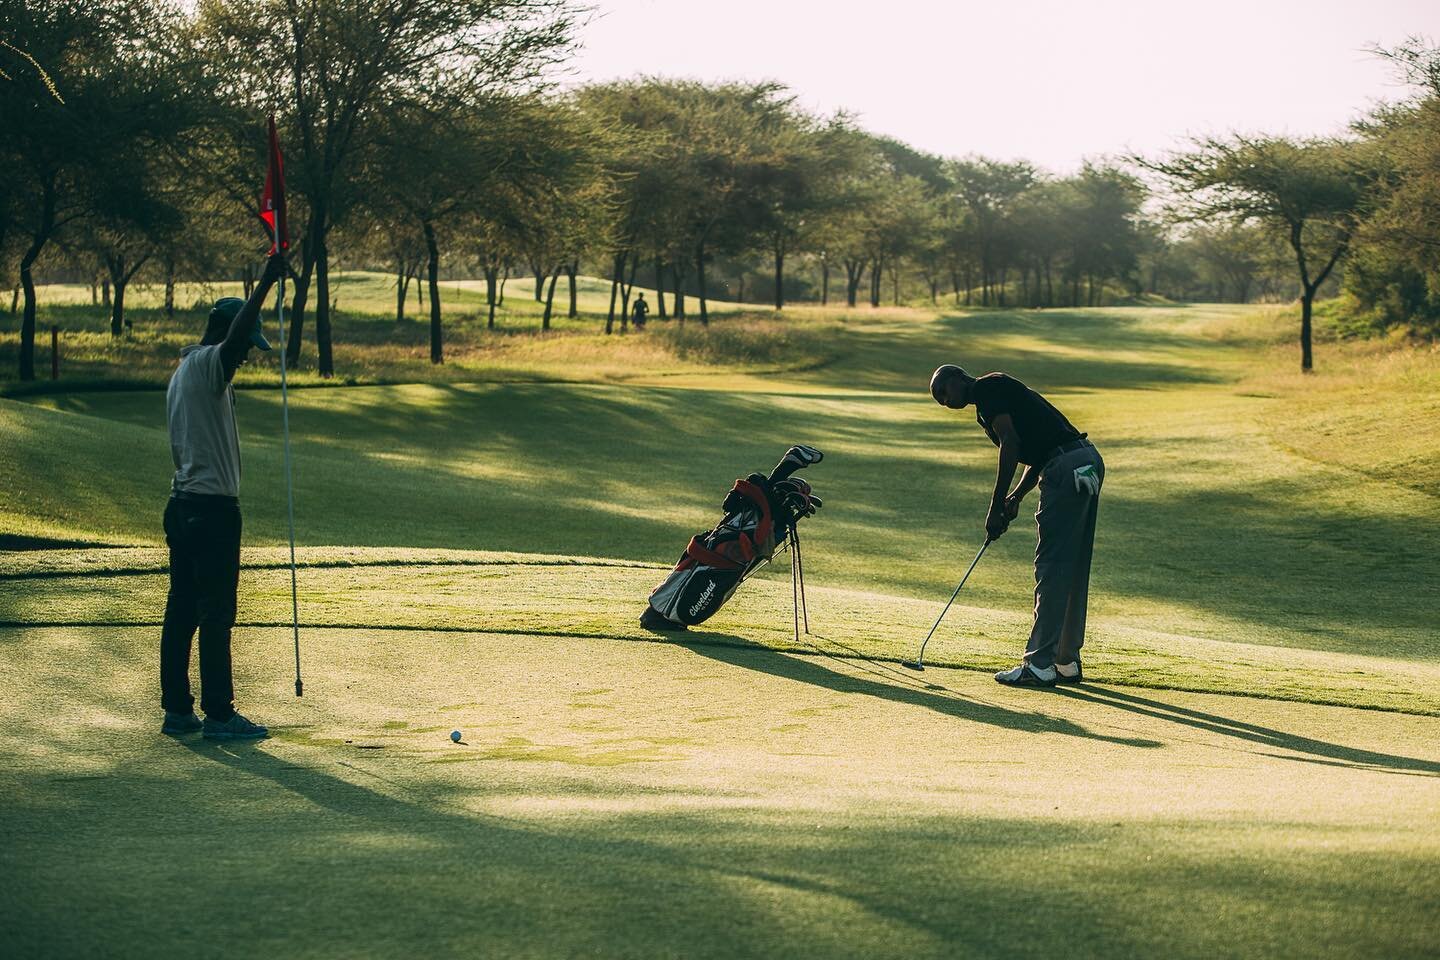 𝒢𝑜𝓁𝒻 𝒶𝓉 𝒹𝒶𝓌𝓃

There is nothing quite like tee-ing off early, whilst the air is still cool and the morning dew covers the greens. 

The Golf Safari House, located just around the corner from the golf club, means guests can enjoy the pleasure